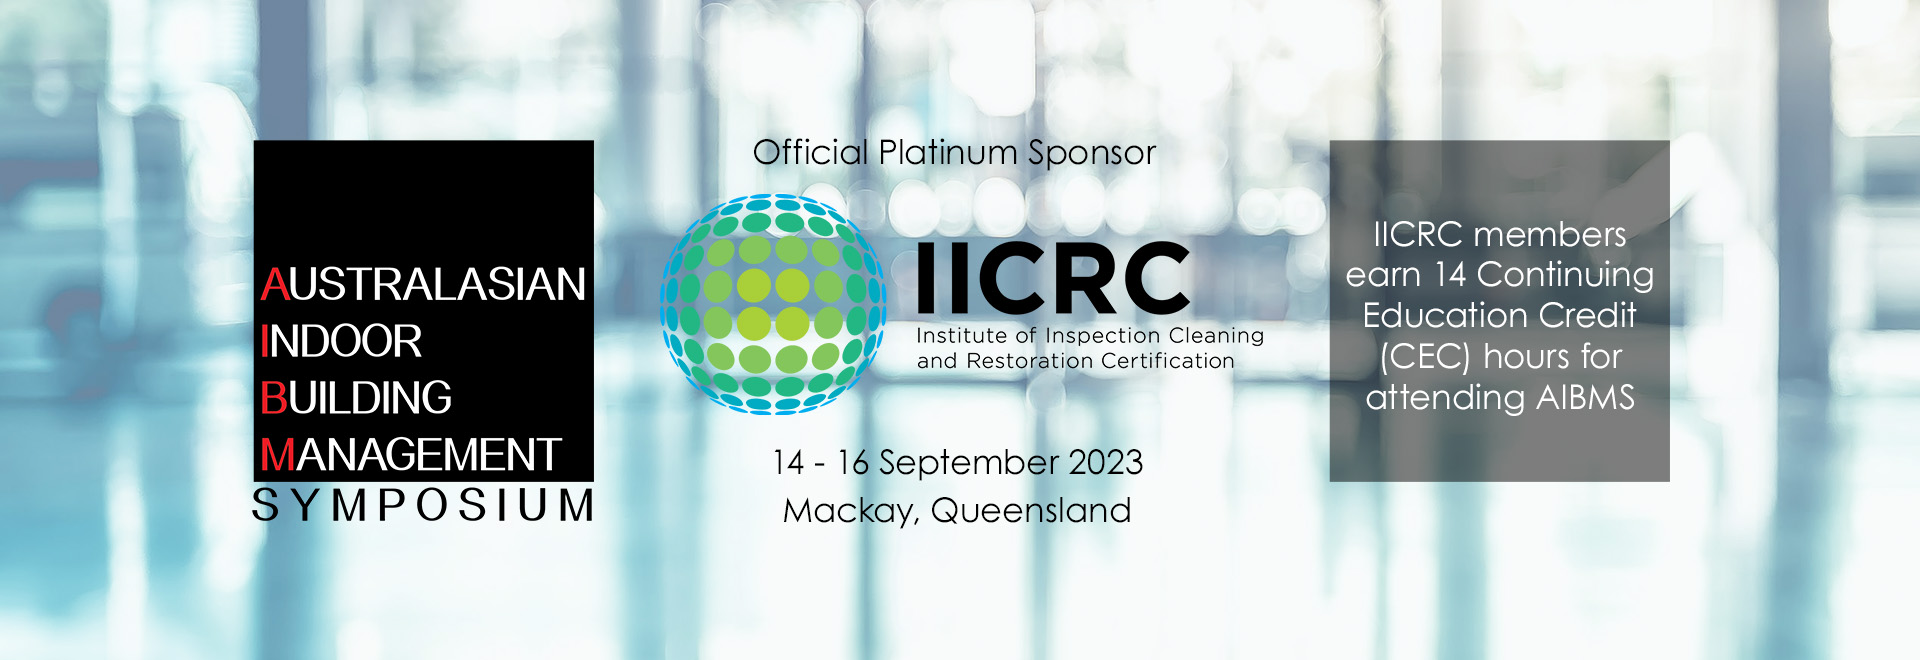 IICRC Official Platinum Sponsor of the AIBMS